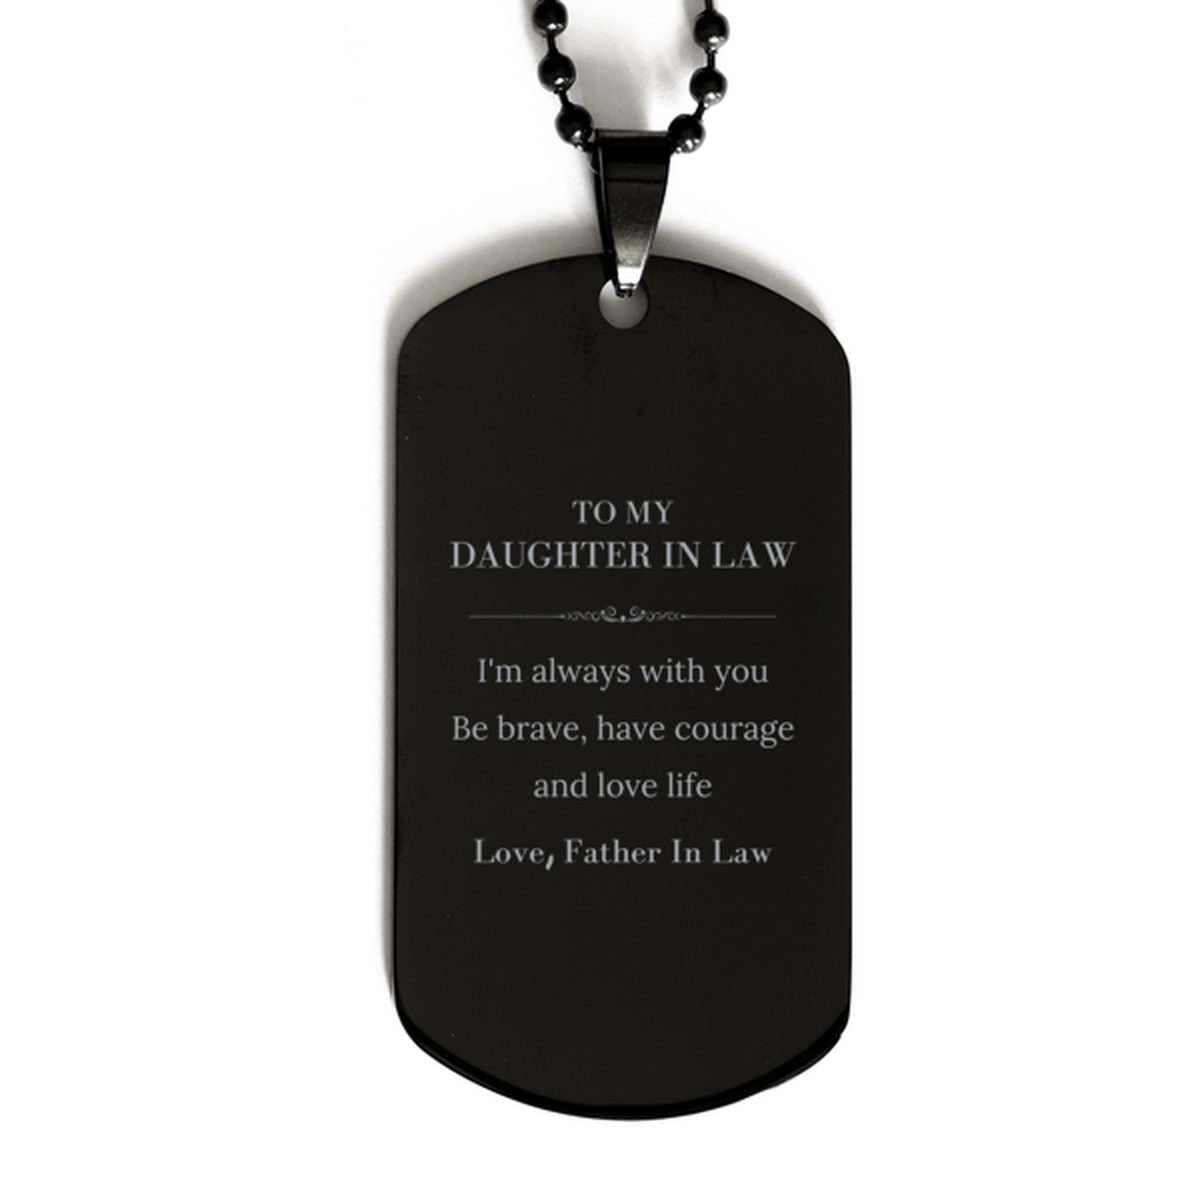 To My Daughter In Law Gifts from Father In Law, Unique Black Dog Tag Inspirational Christmas Birthday Graduation Gifts for Daughter In Law I'm always with you. Be brave, have courage and love life. Love, Father In Law